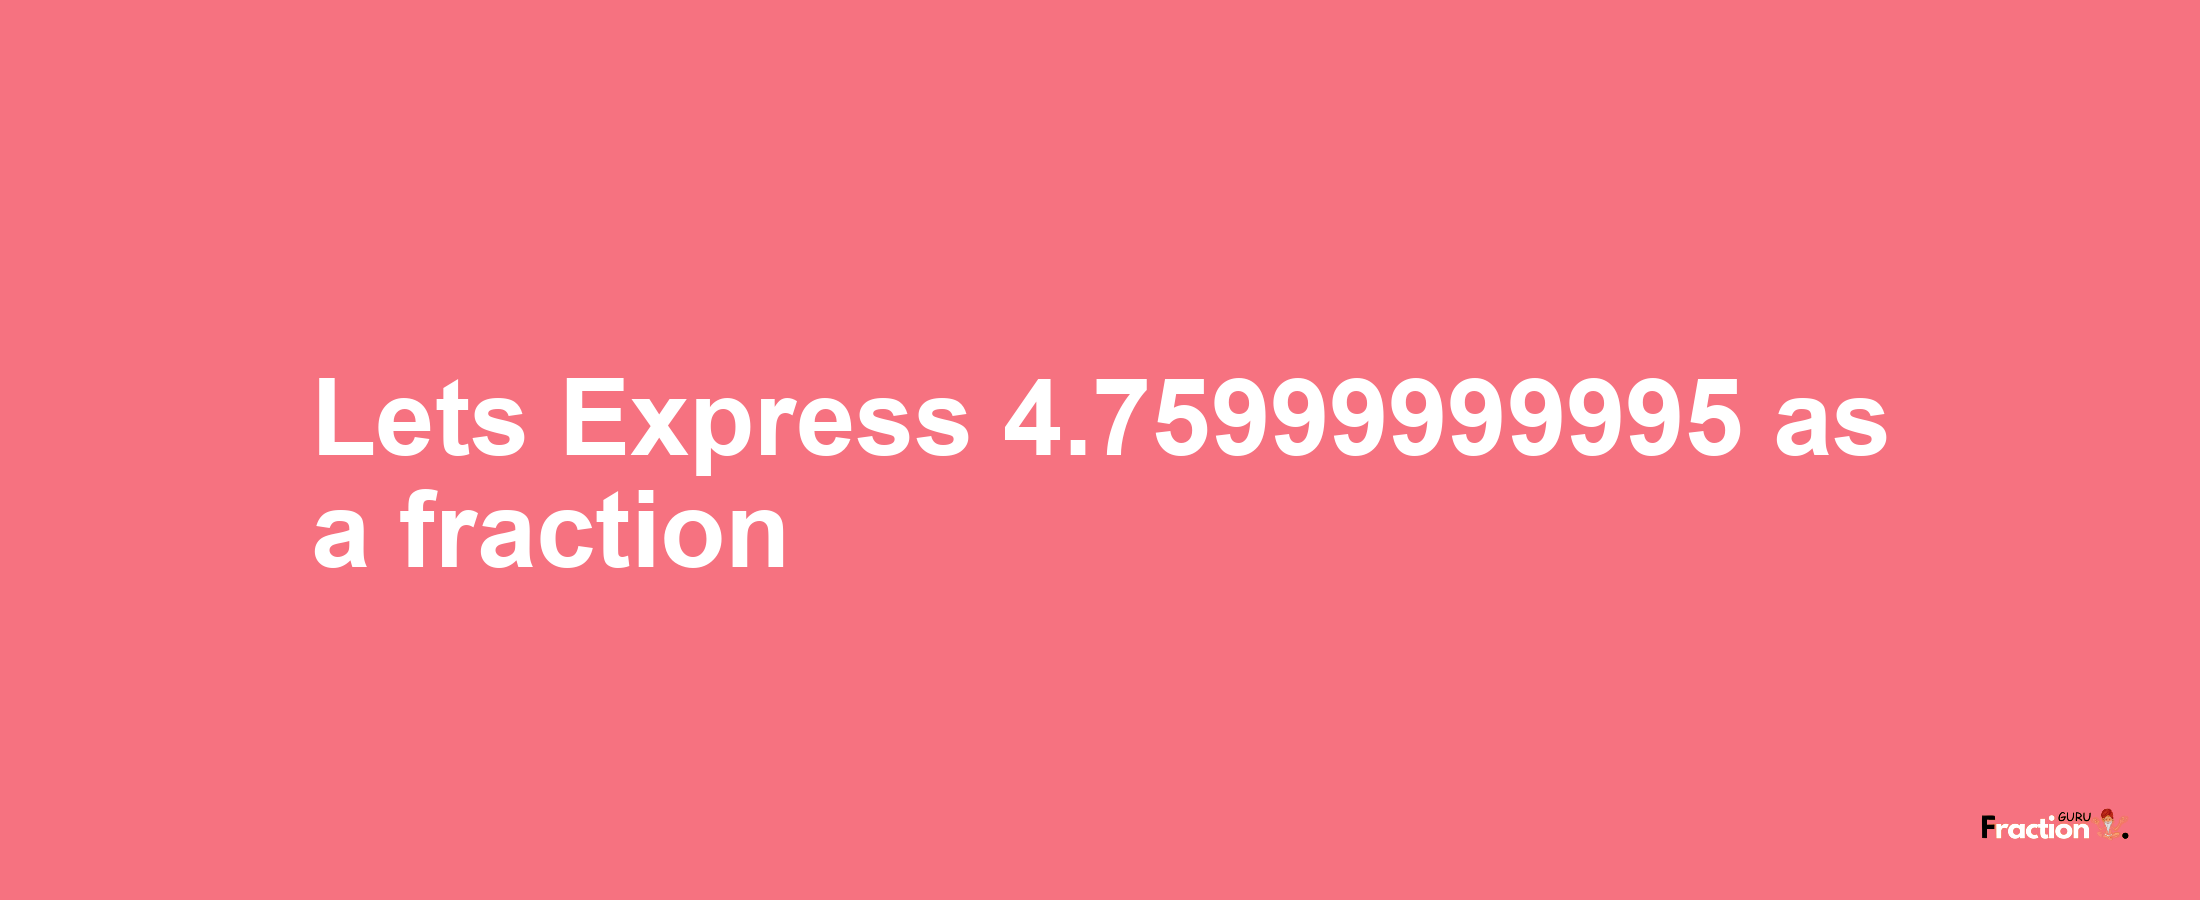 Lets Express 4.75999999995 as afraction